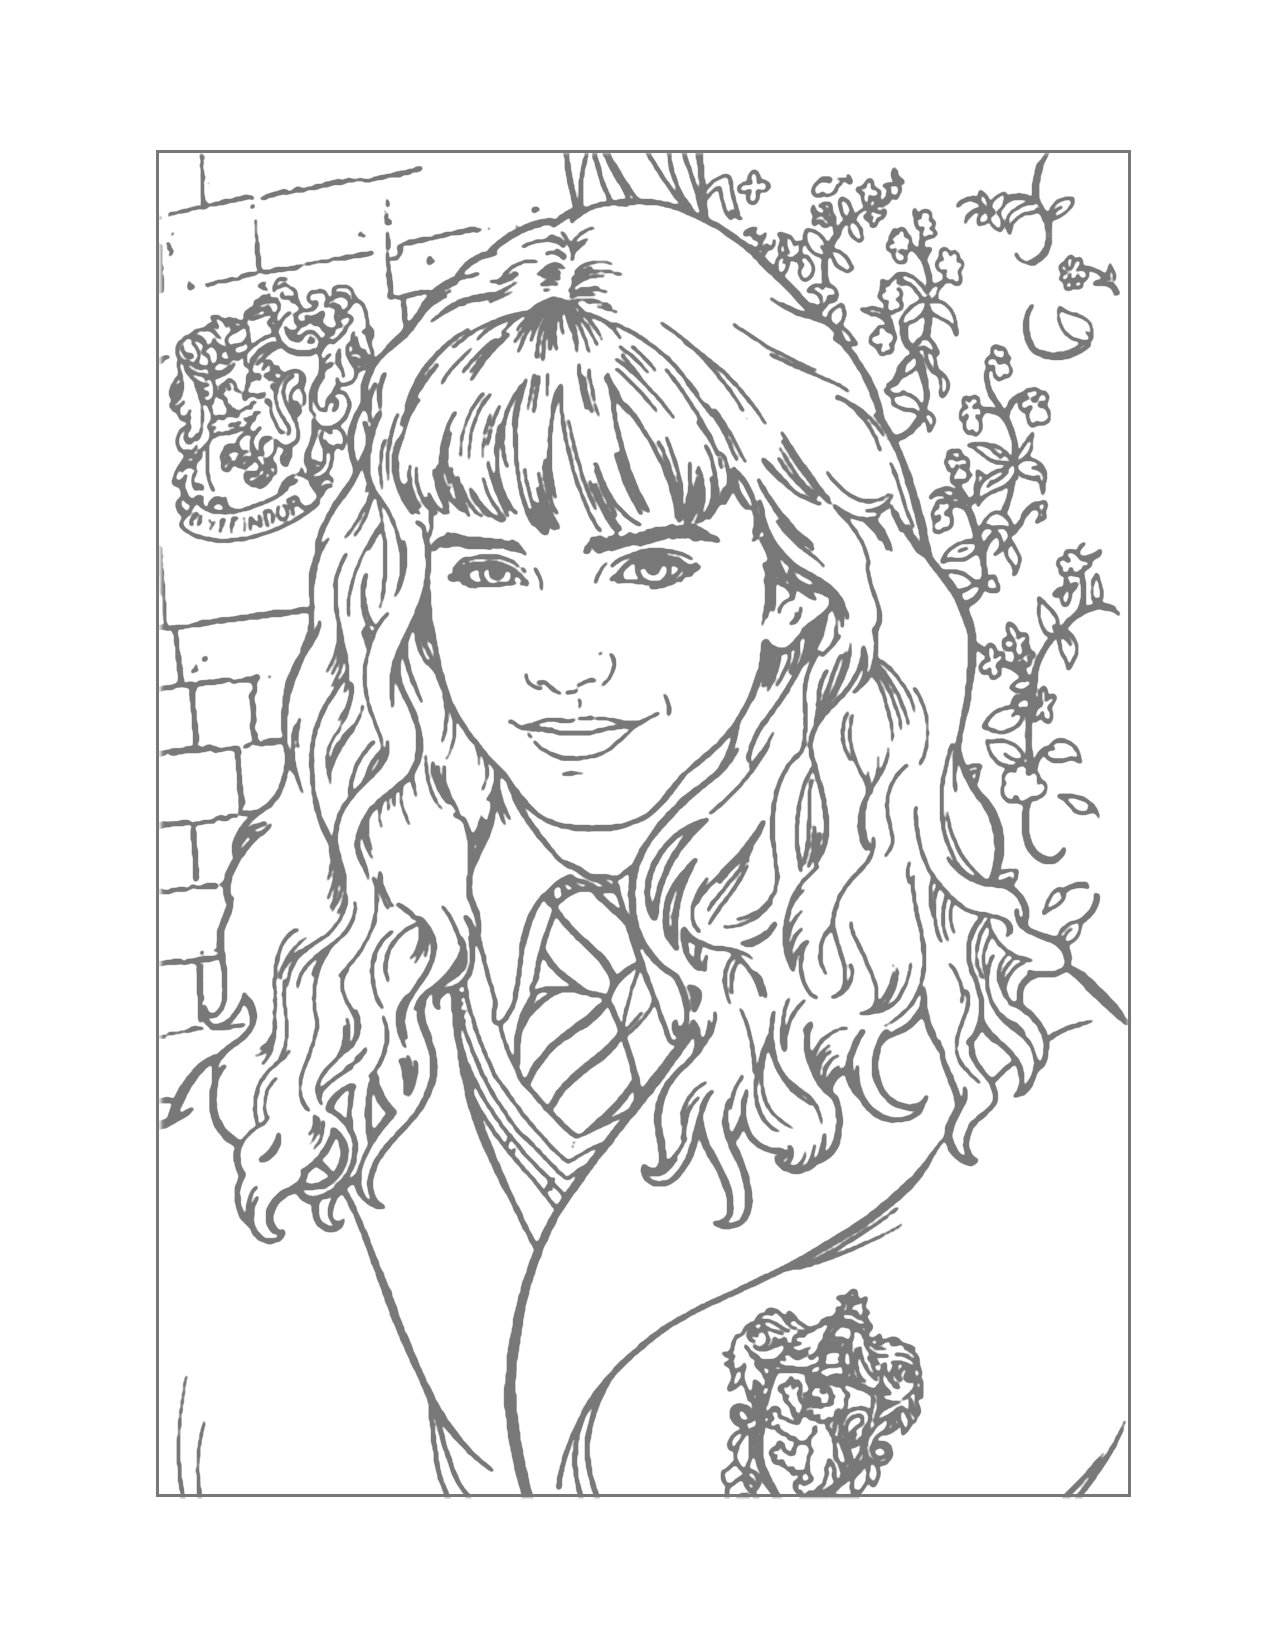 Hermione Granger Traceable Coloring Page